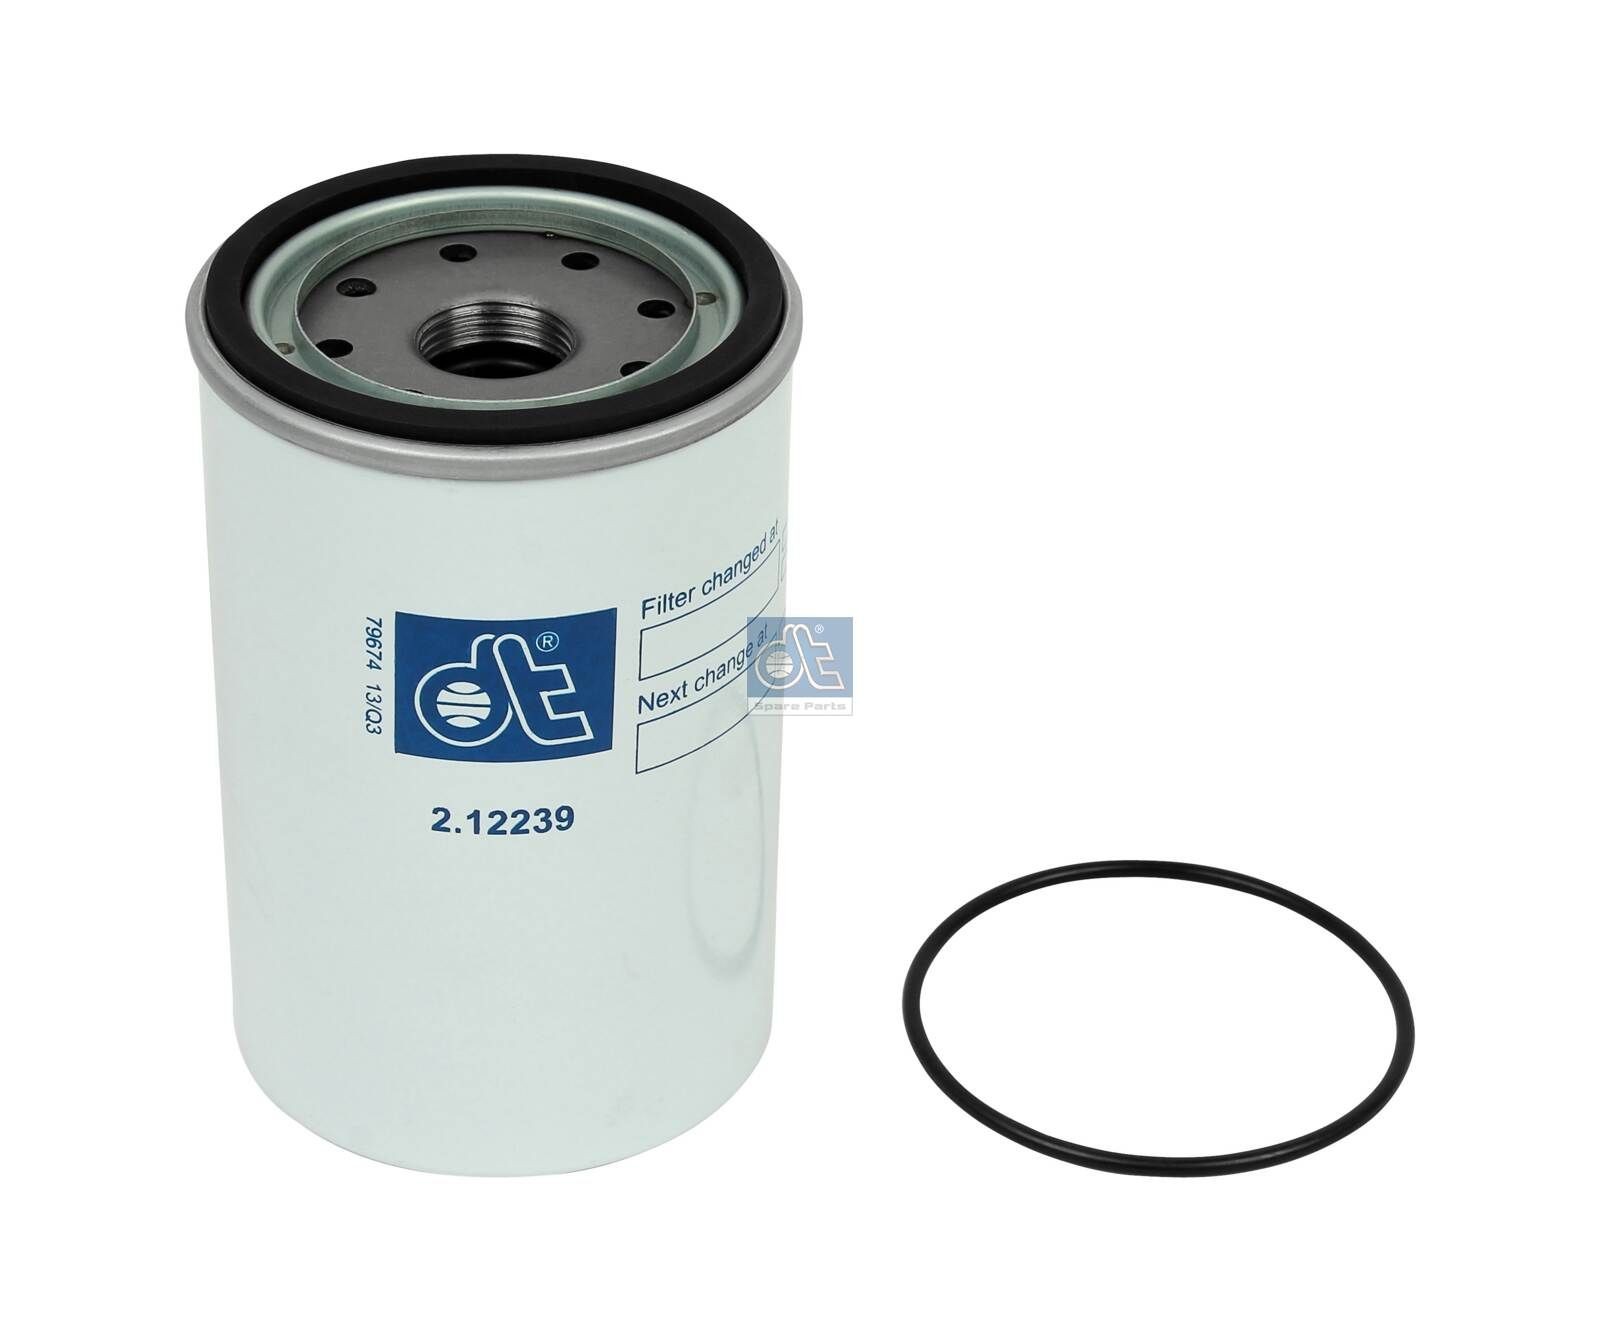 WK 940/33 x DT Spare Parts 2.12239 Fuel filter 74 20 514 654